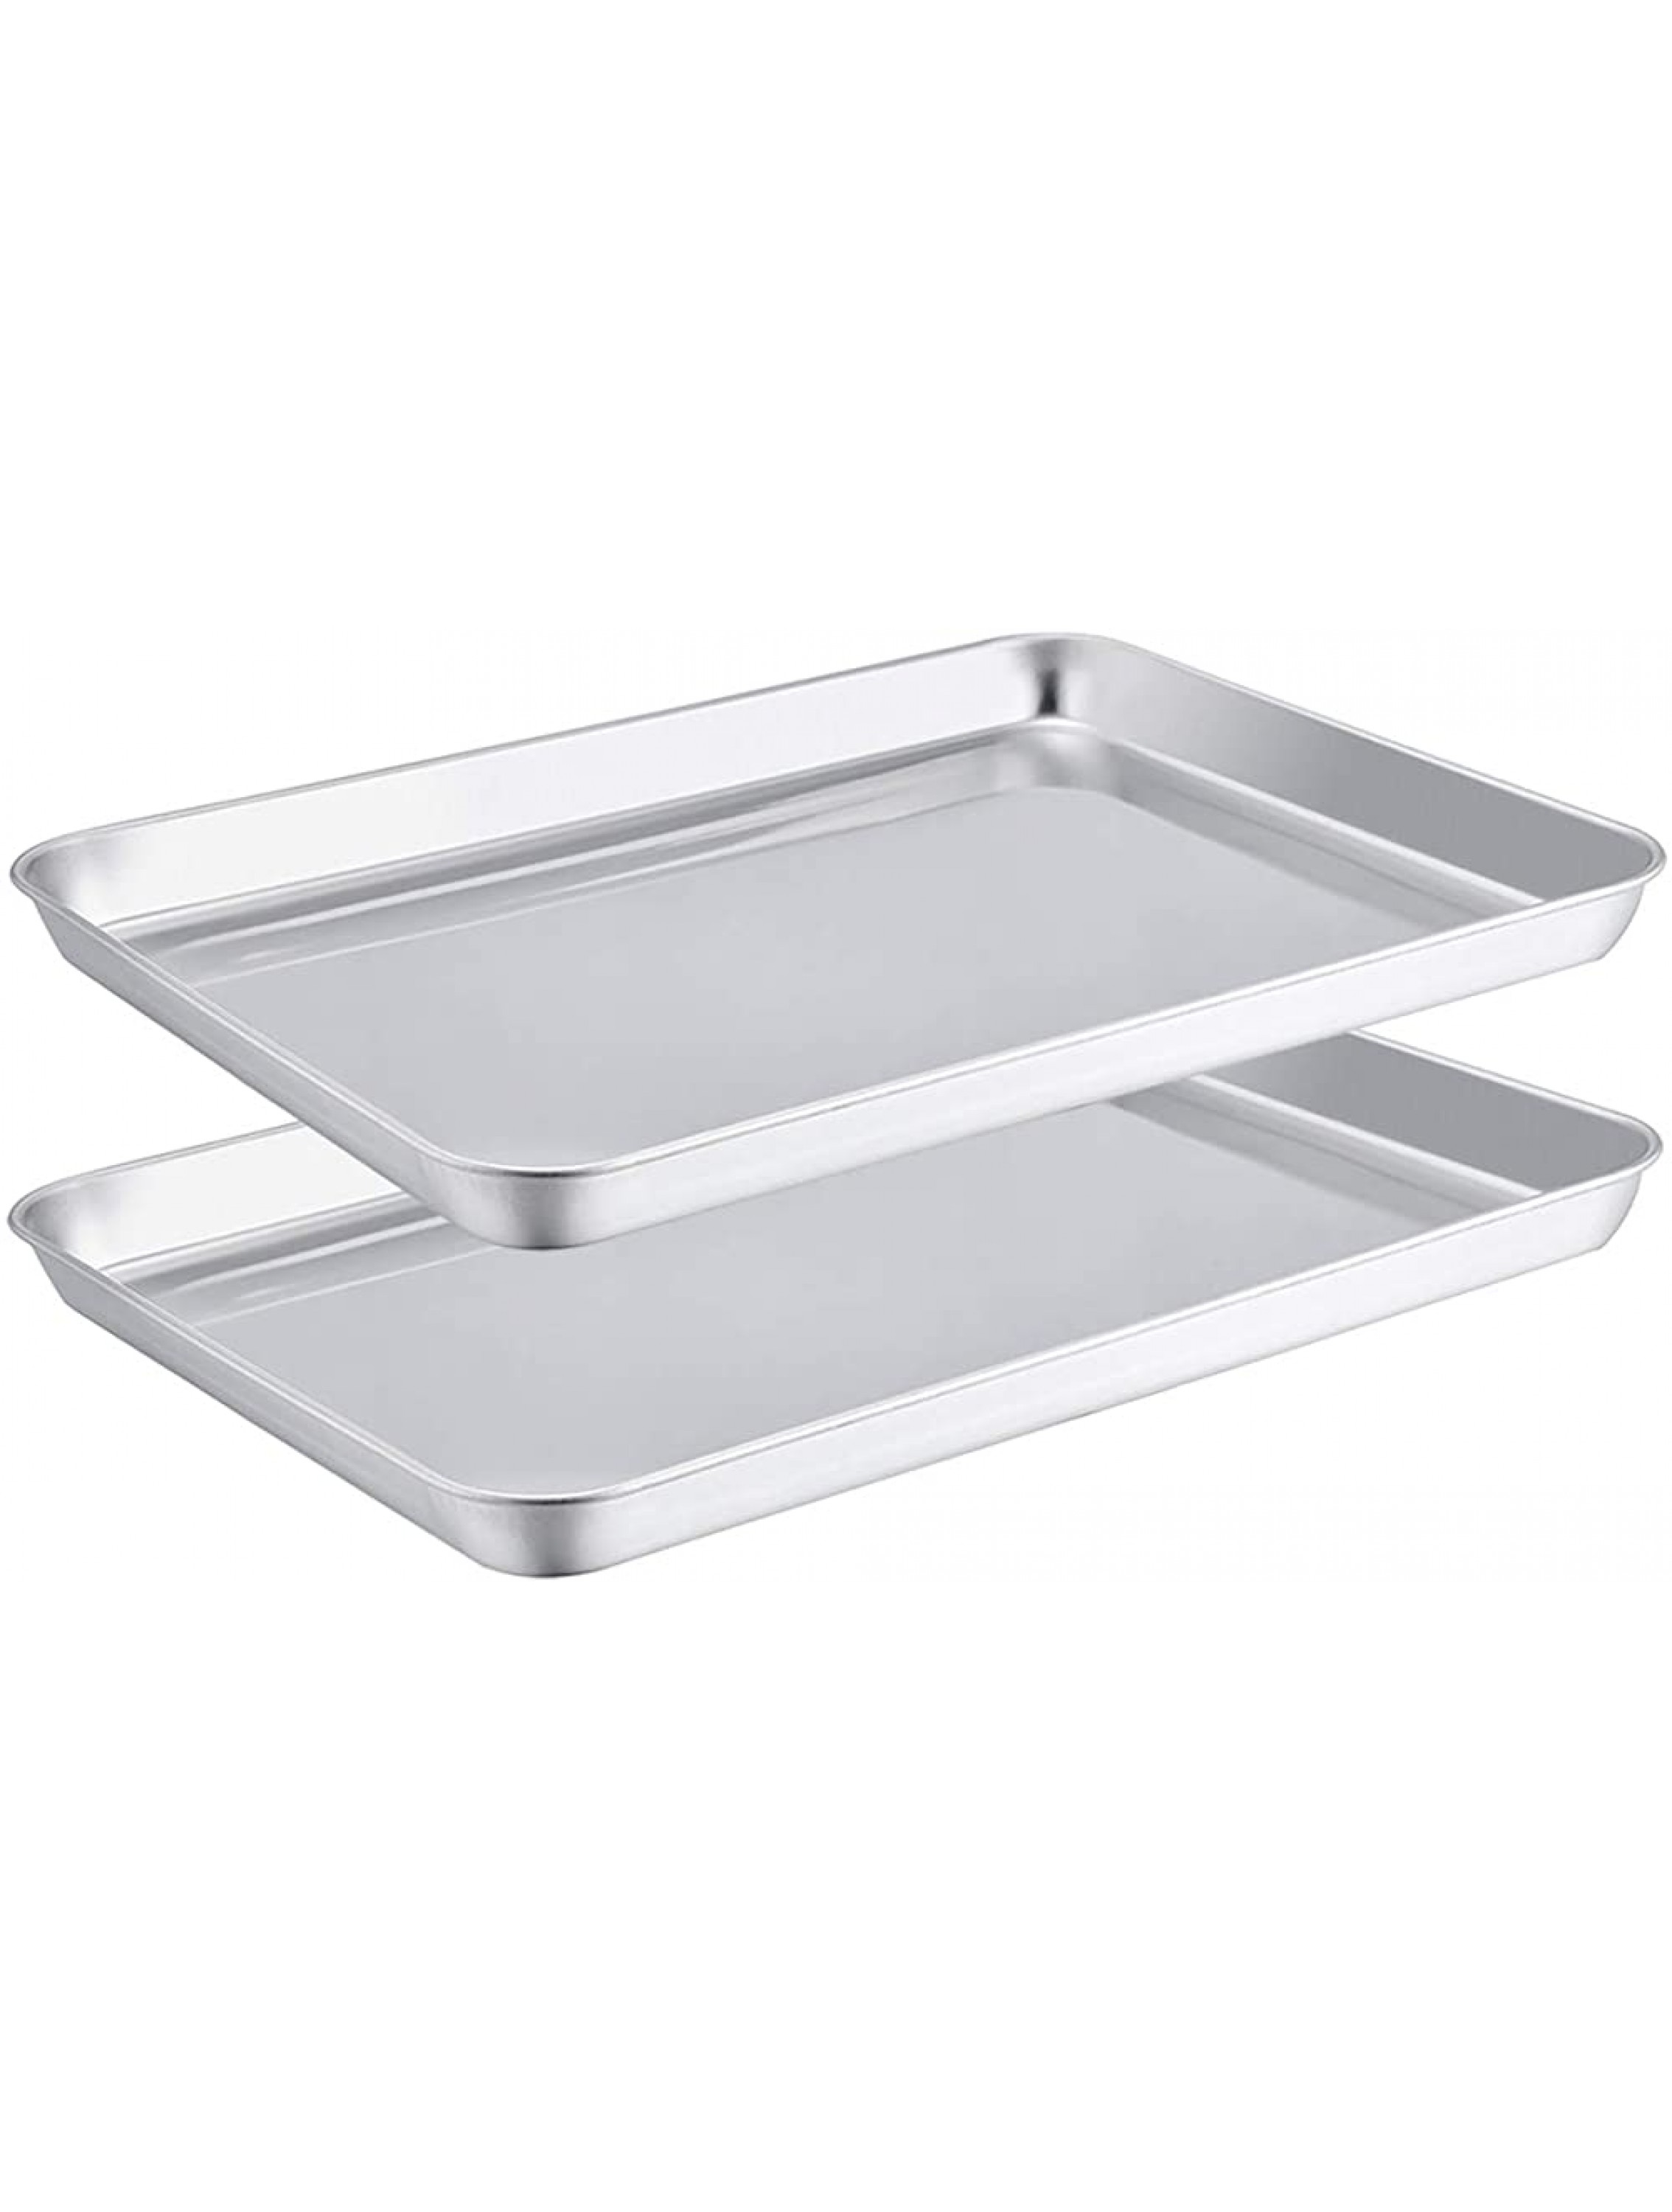 TeamFar Toaster Oven Pans Set of 2 Stainless Steel Compact Toaster Oven Tray Ovenware 8''x10.5''x1'' Non-Toxic & Healthy Easy Clean & Dishwasher Safe Roll Edge & Mirror Finish - BNKF8761S